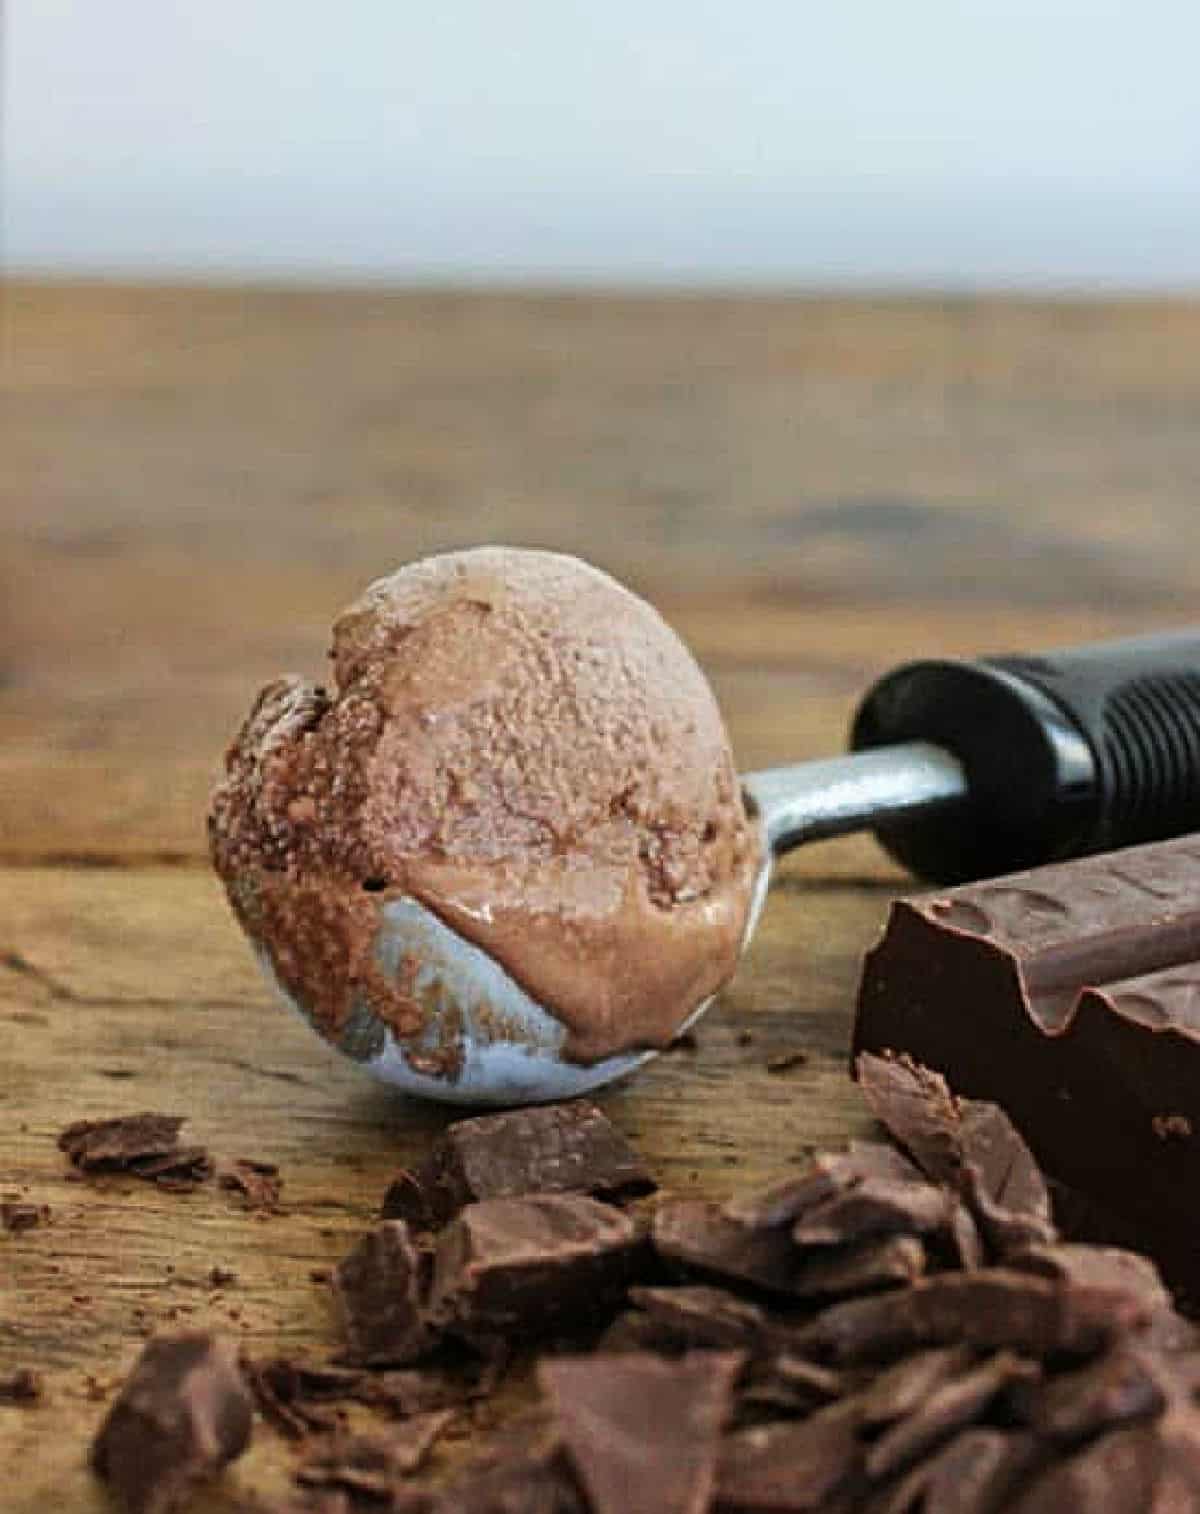 Scoop of chocolate ice cream on a wooden table, chopped chocolate around.